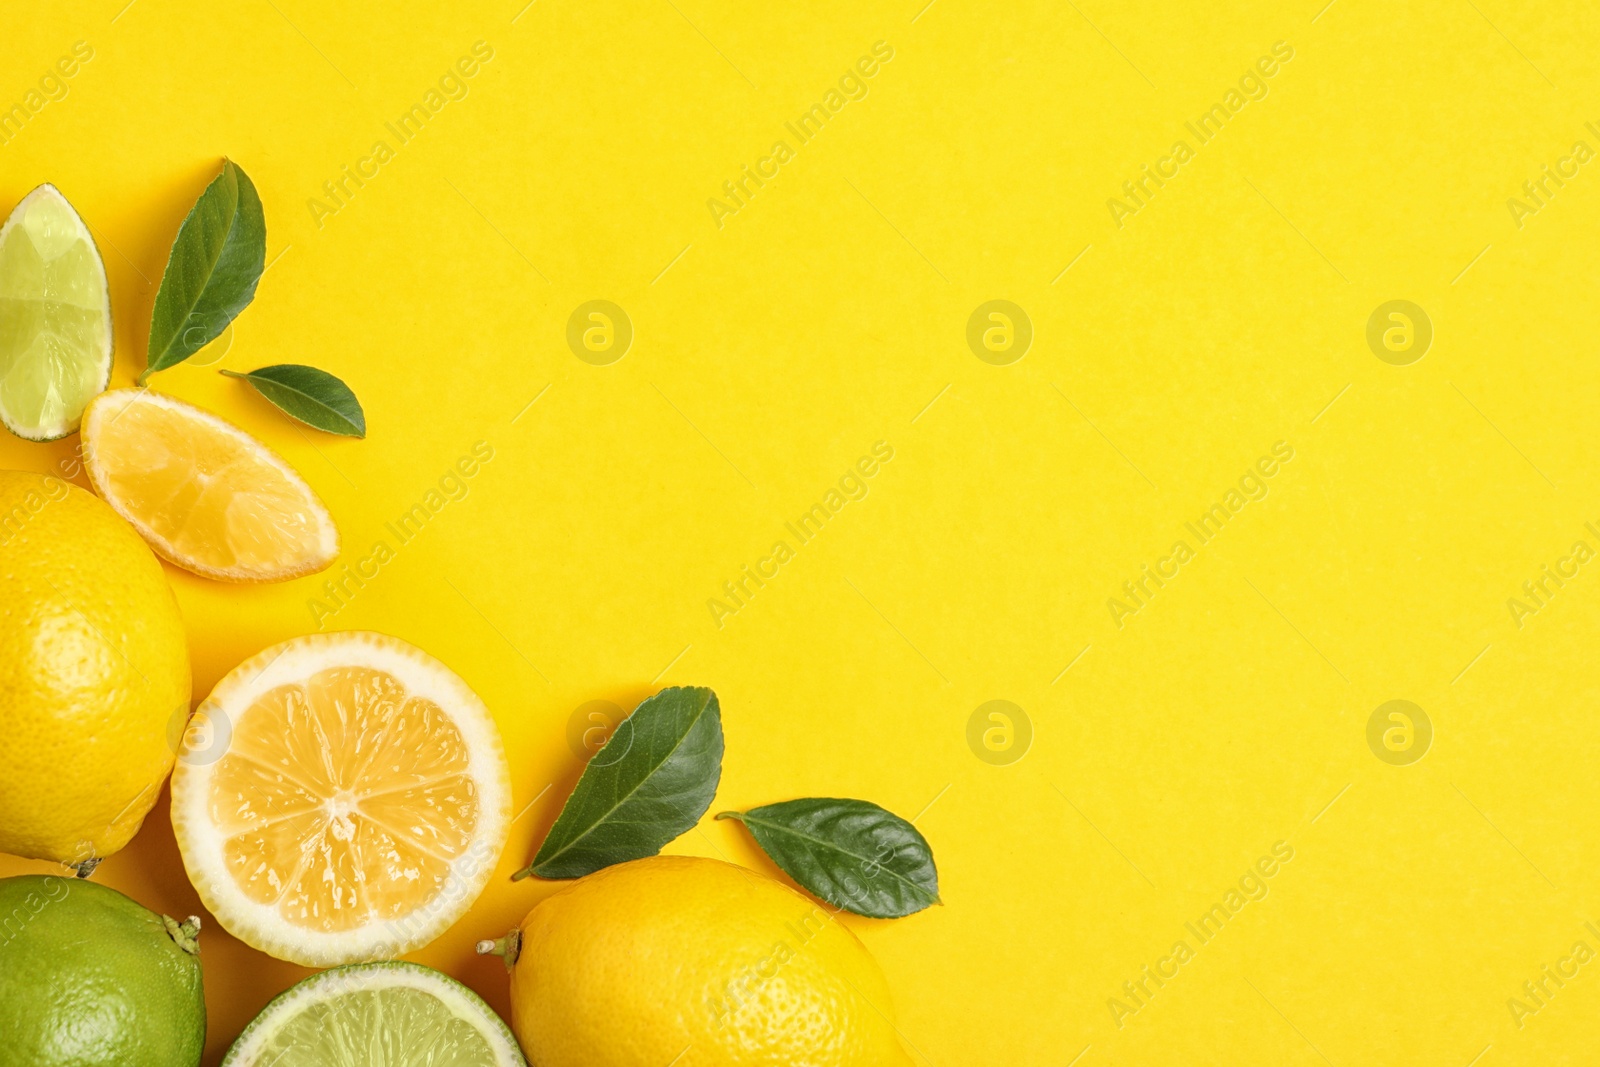 Photo of Fresh ripe lemons, limes and green leaves on yellow background, flat lay. Space for text